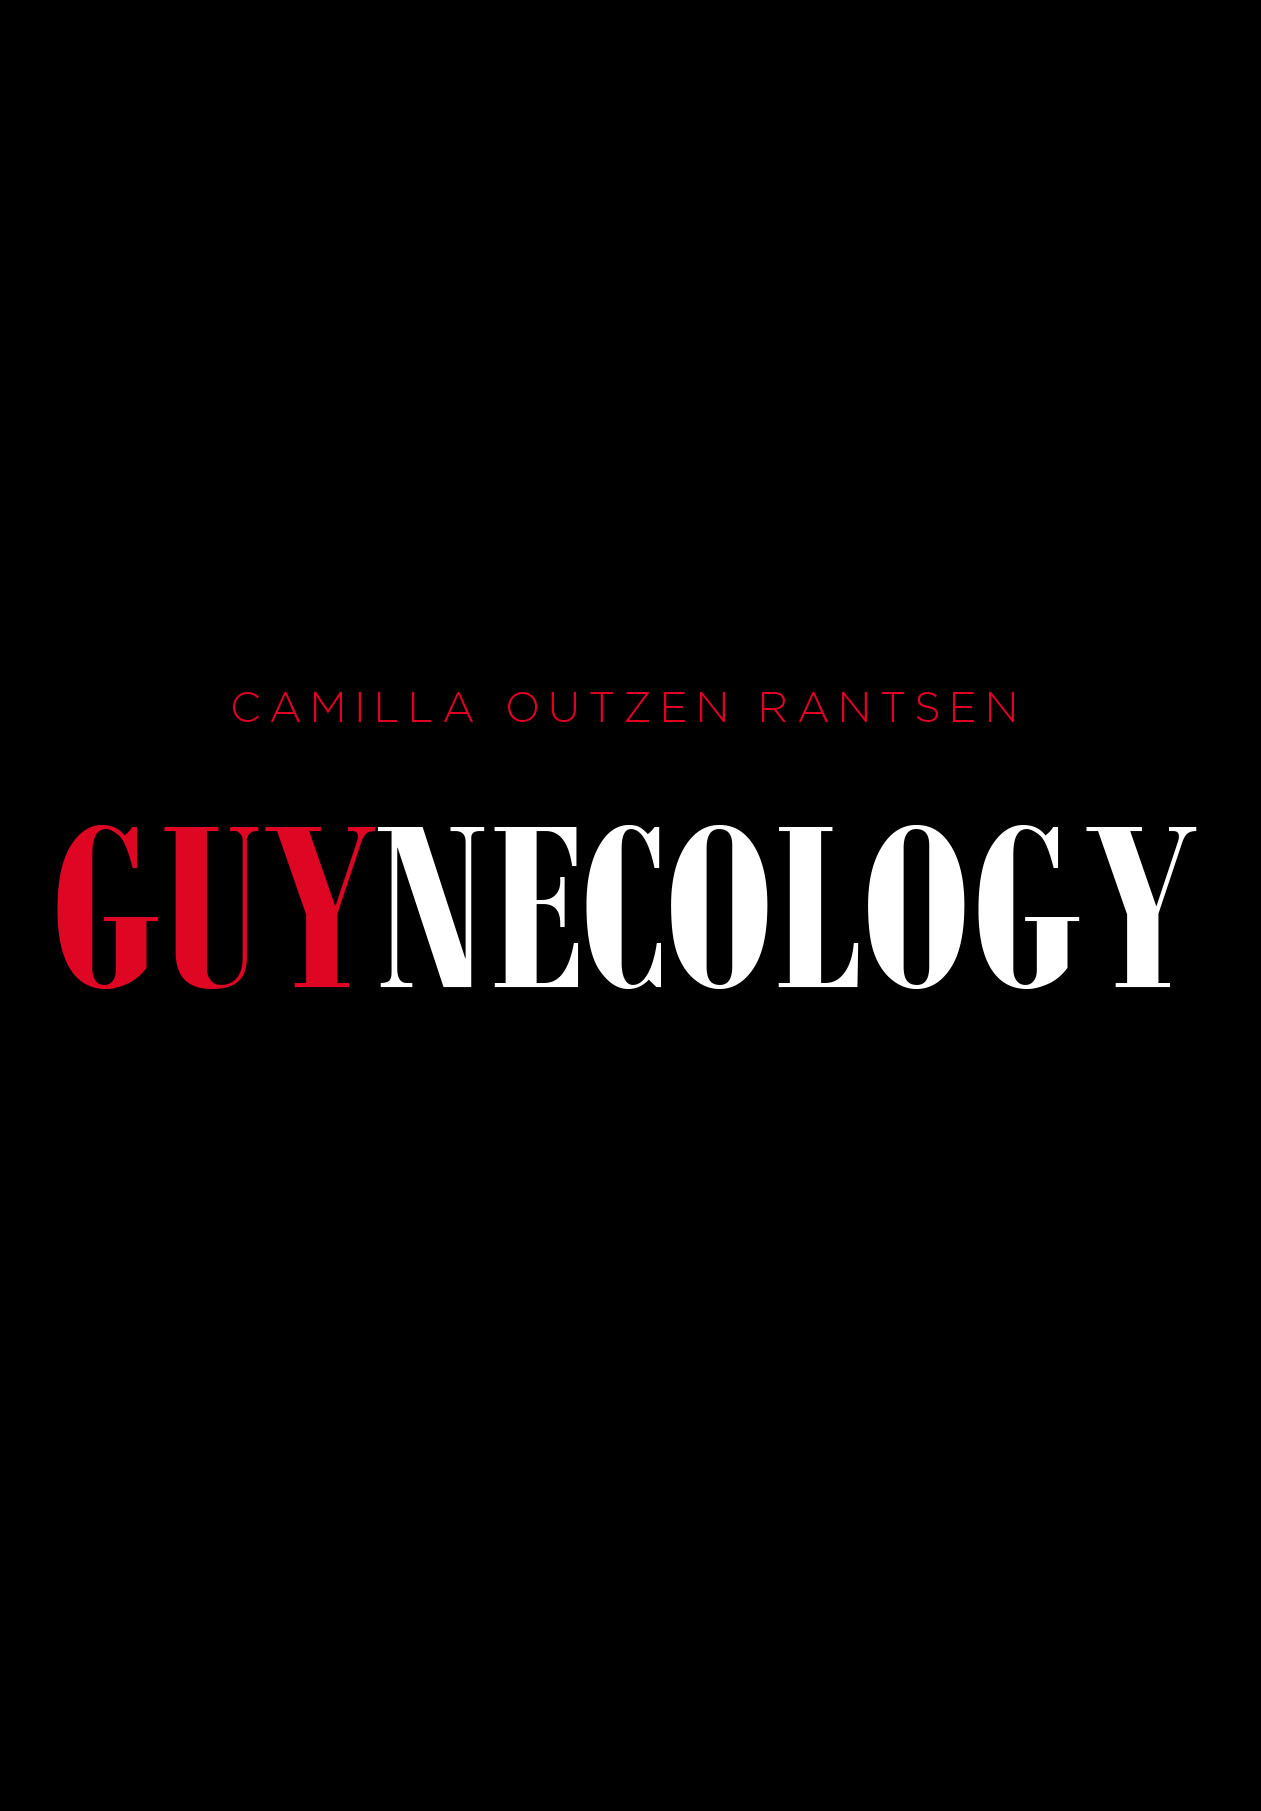 Camilla Outzen Rantsen’s New Book, "Guynecology," is an Enthralling and Varied Collection of Short Stories That Examines the Nature of Relationships at Its Core